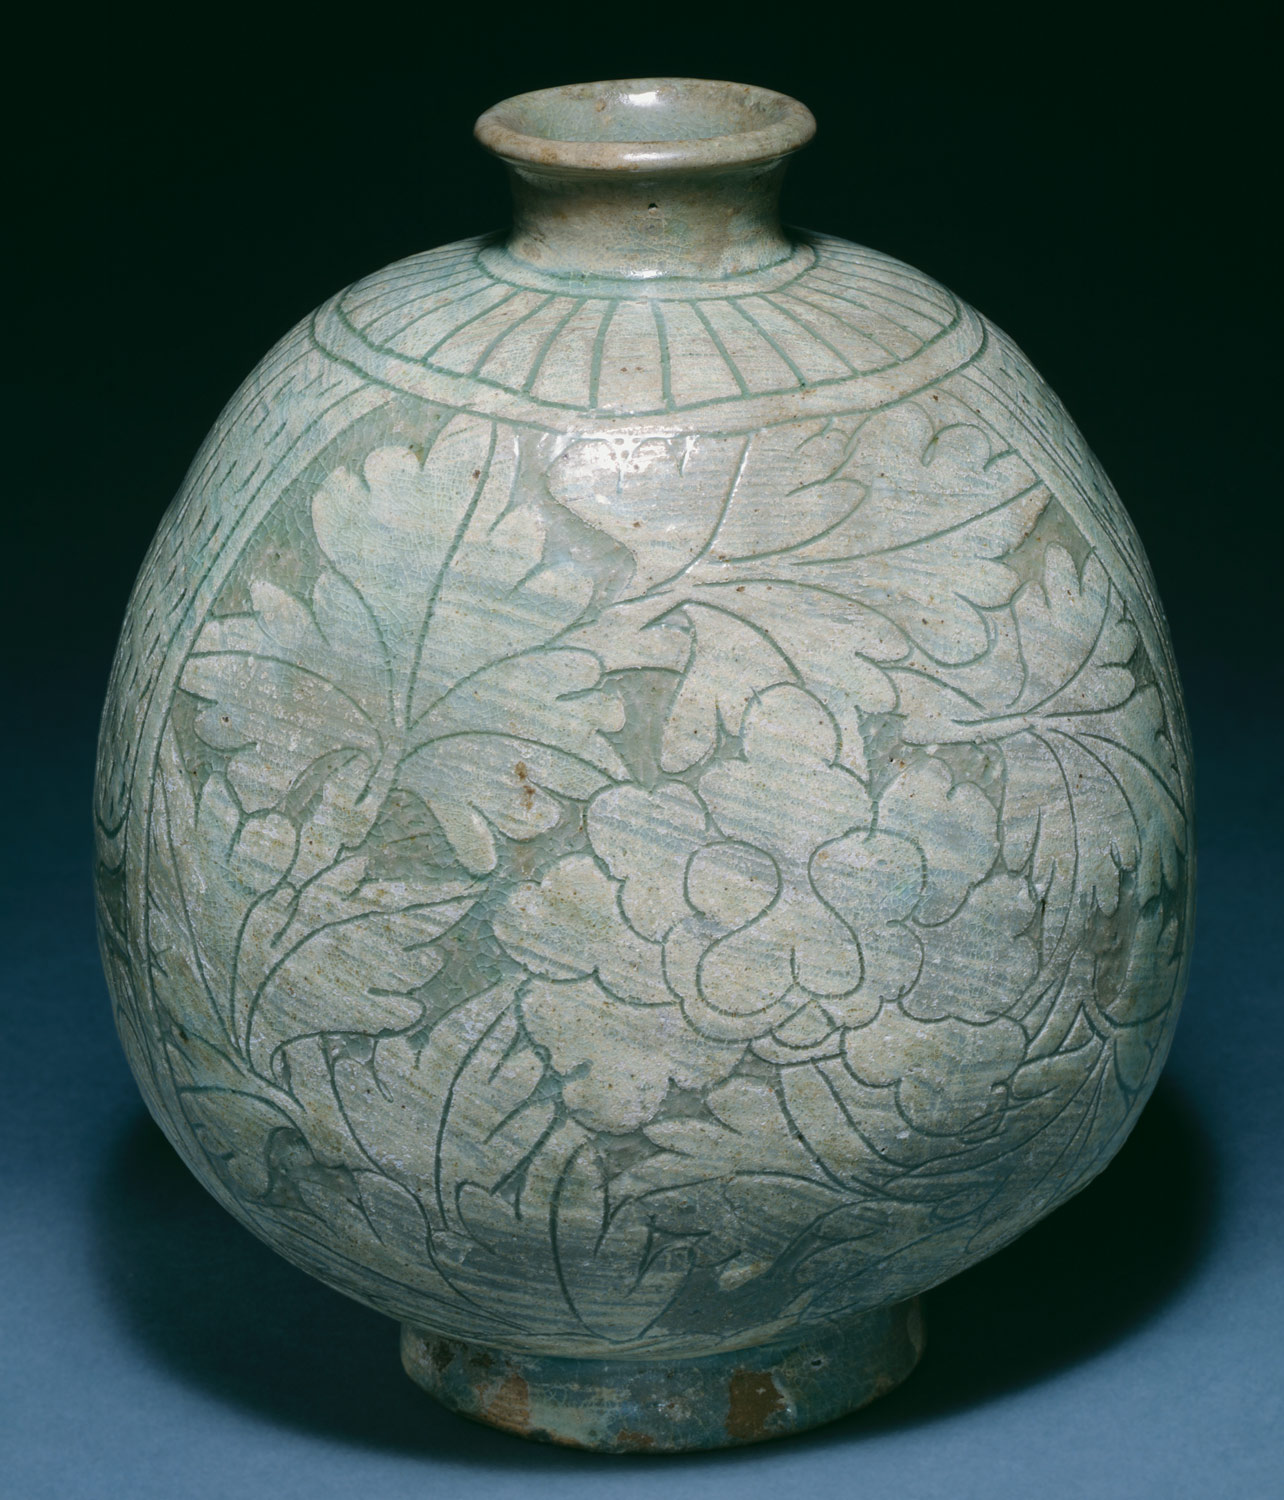 Flask-shaped bottle with decoration of peonies